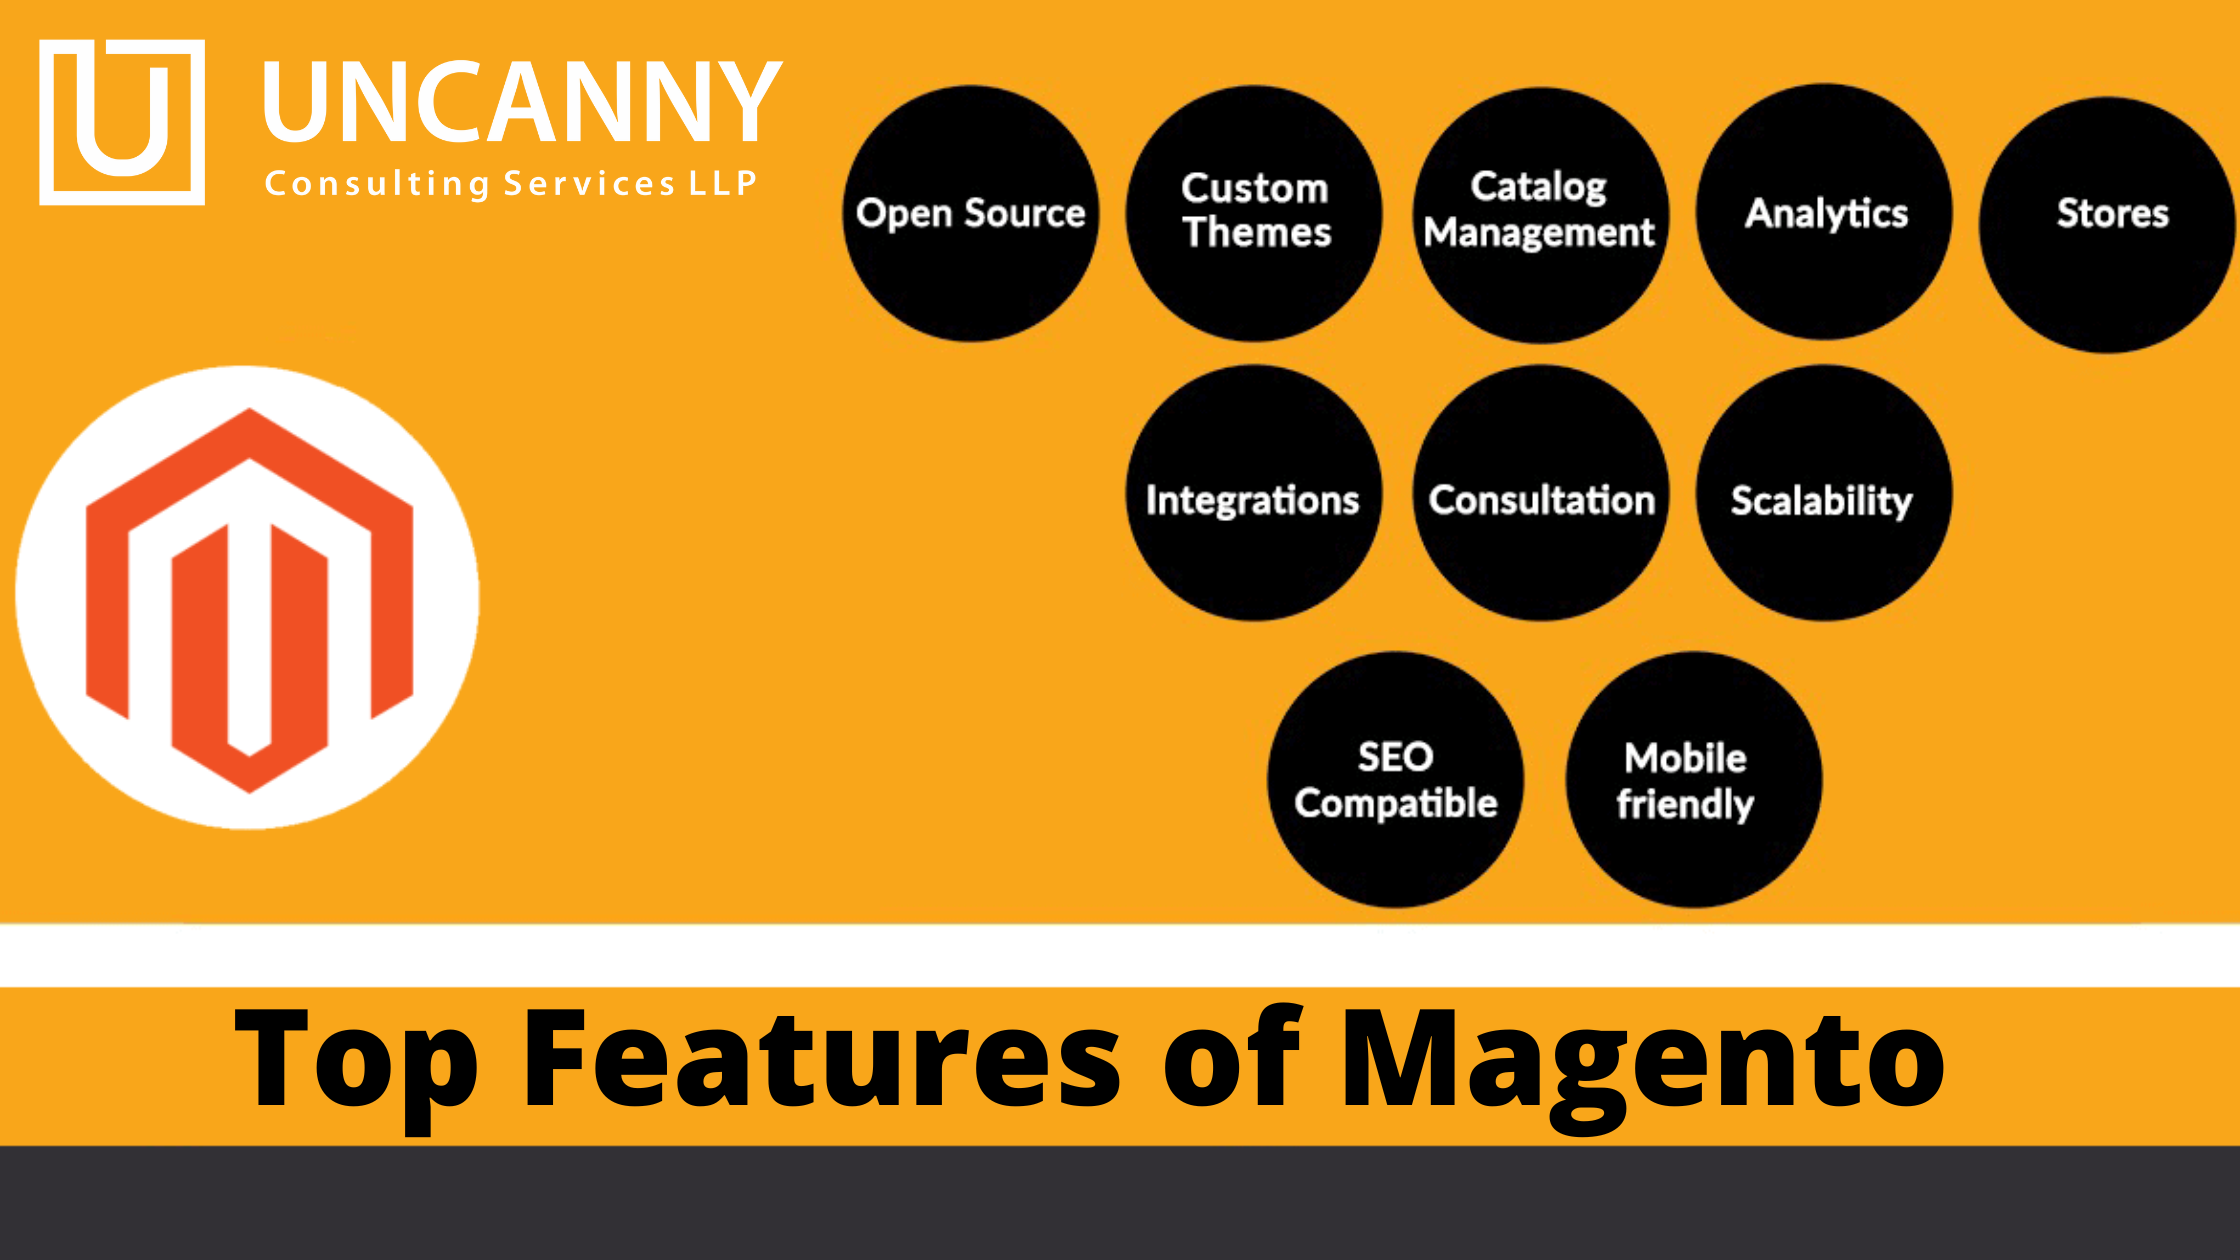 Top Features of Magento